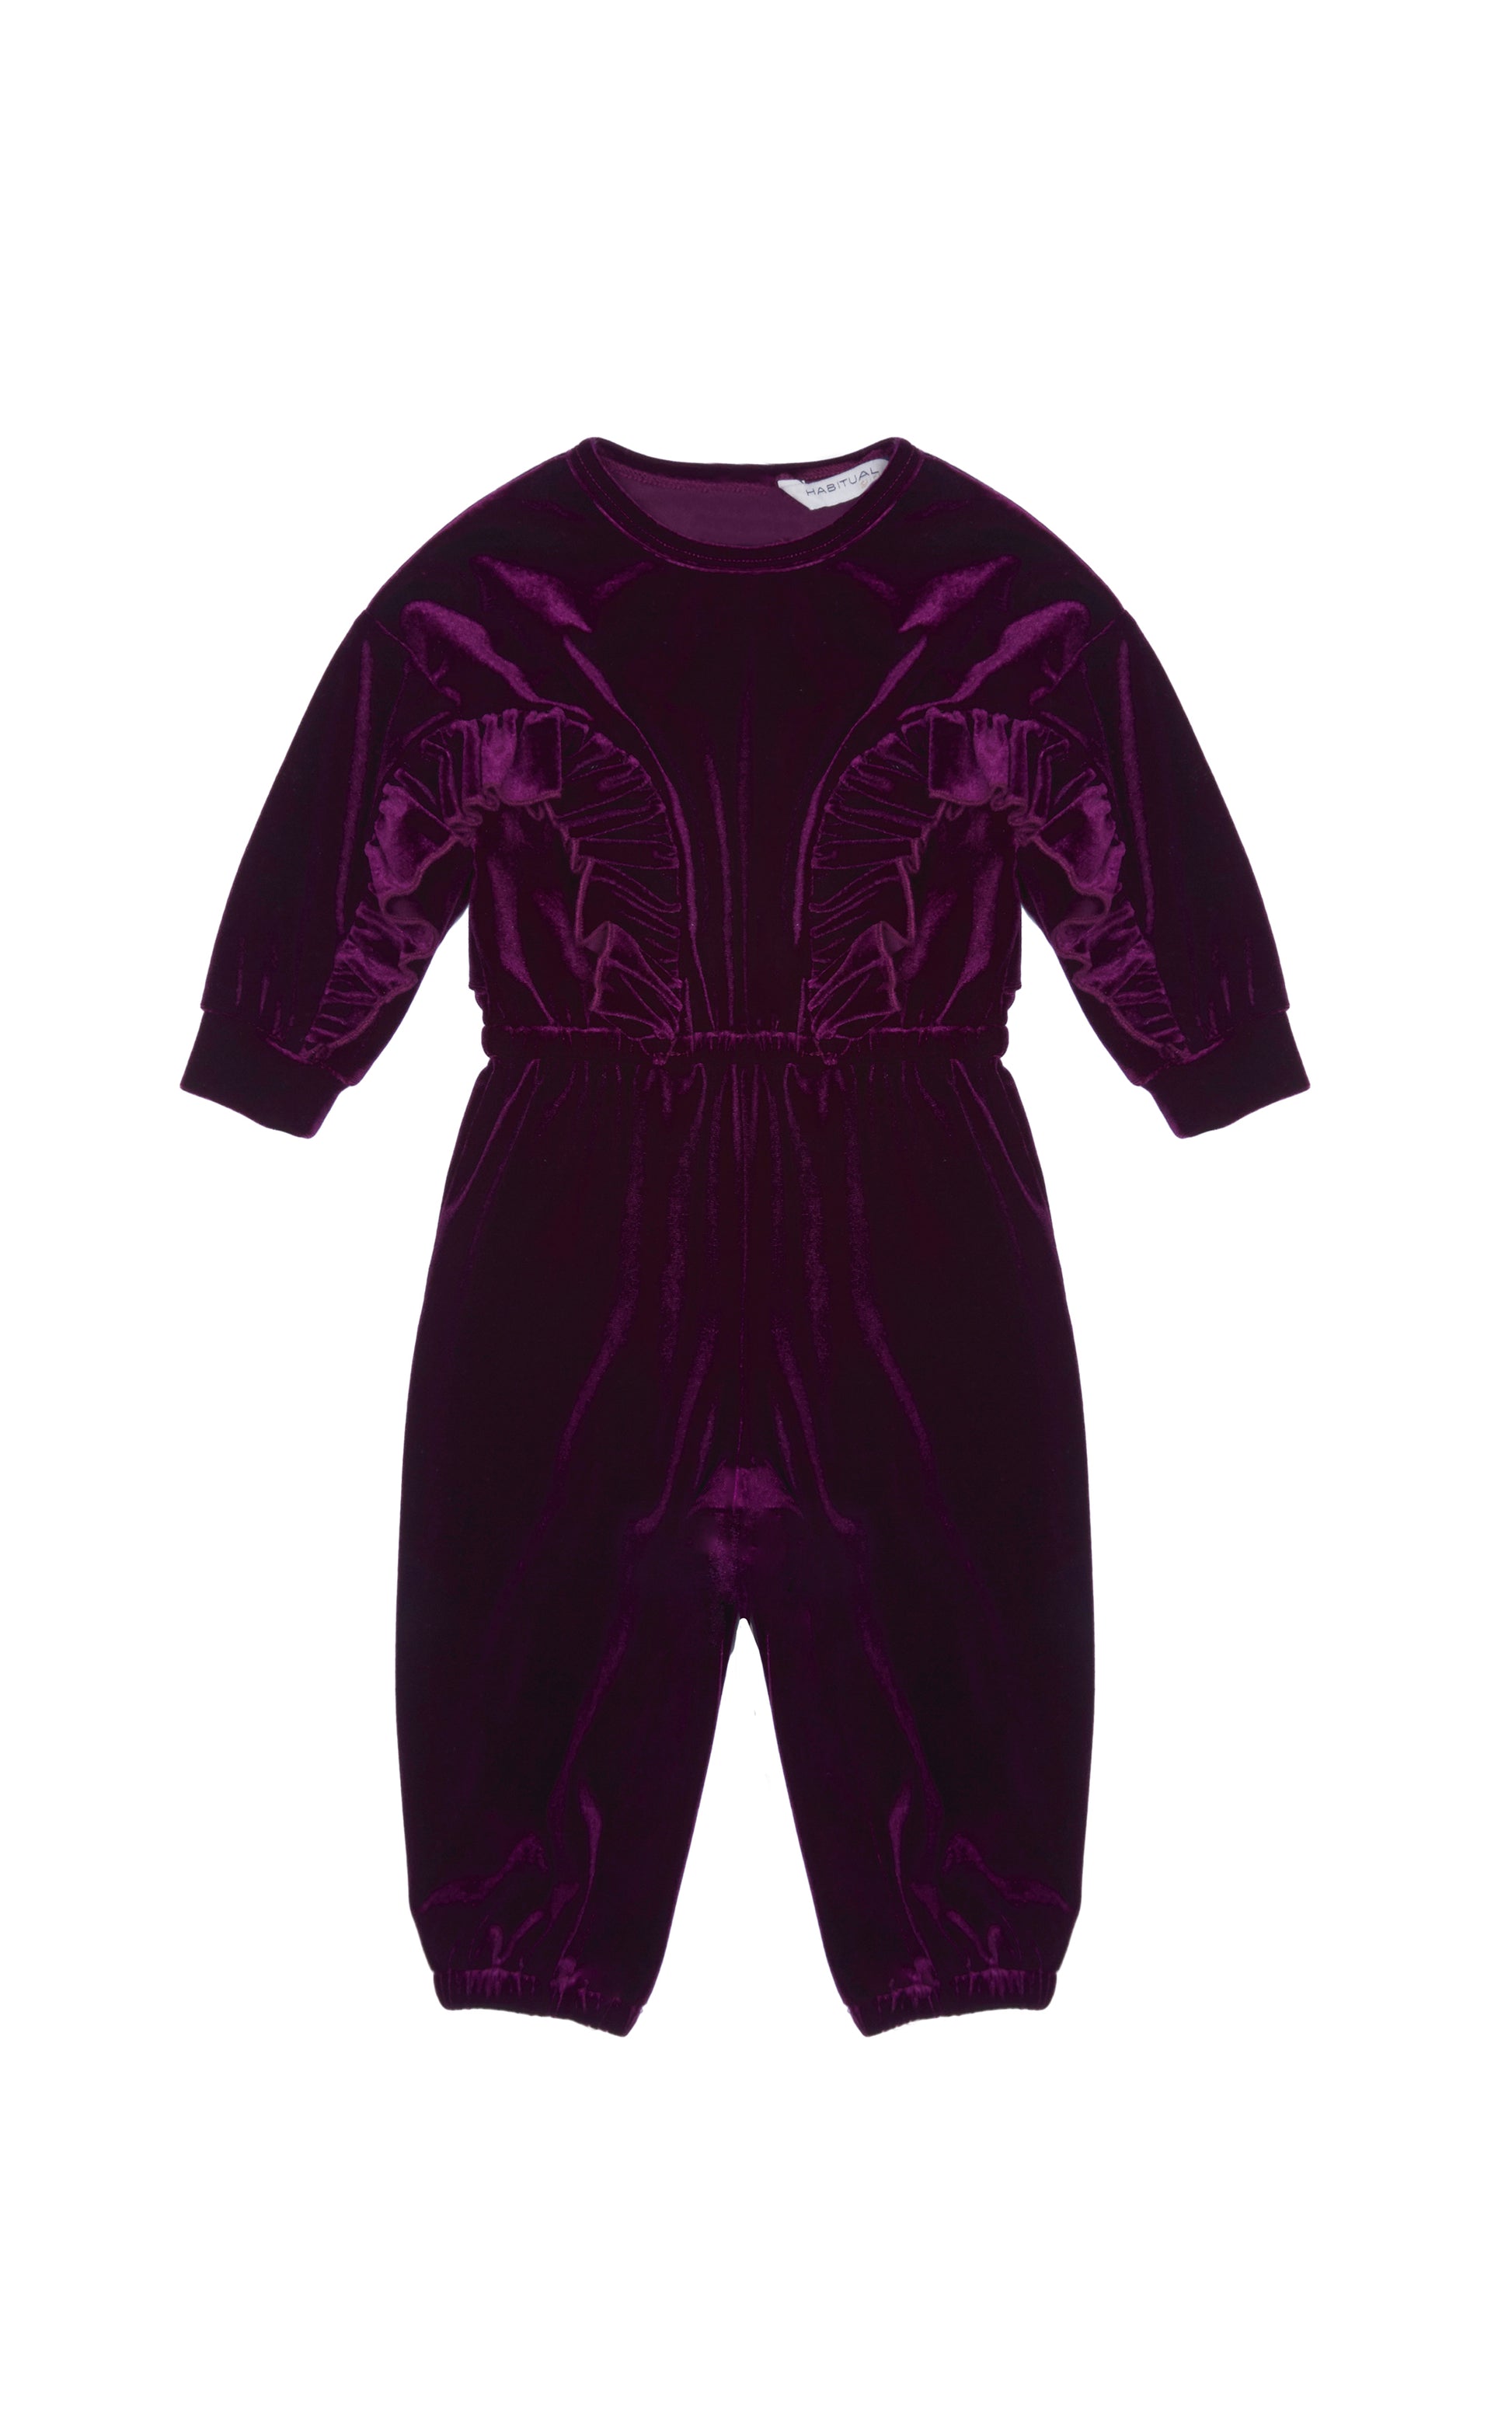 Long-sleeve purple jumpsuit with ruffle trim along arms and front. 